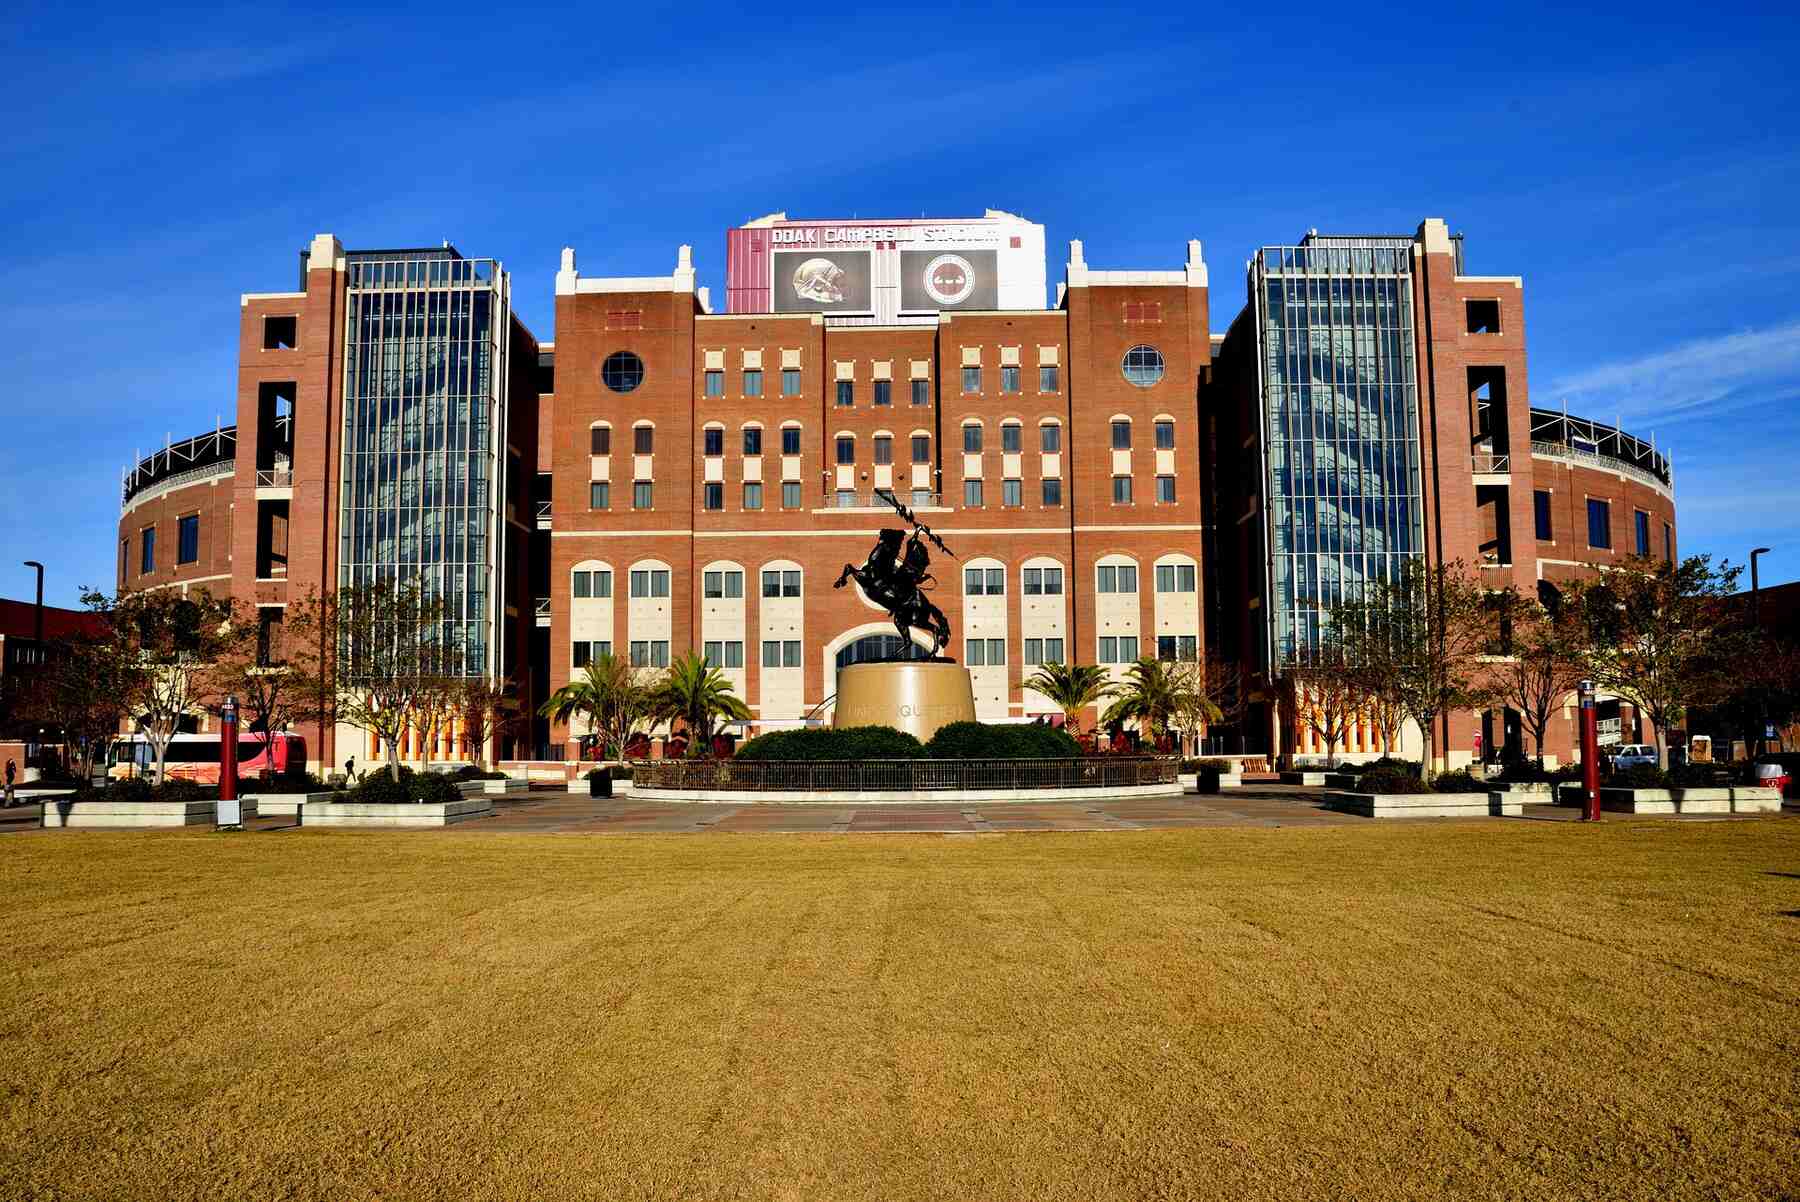 Grassy field in front of the Florida State University stadium on a sunny day